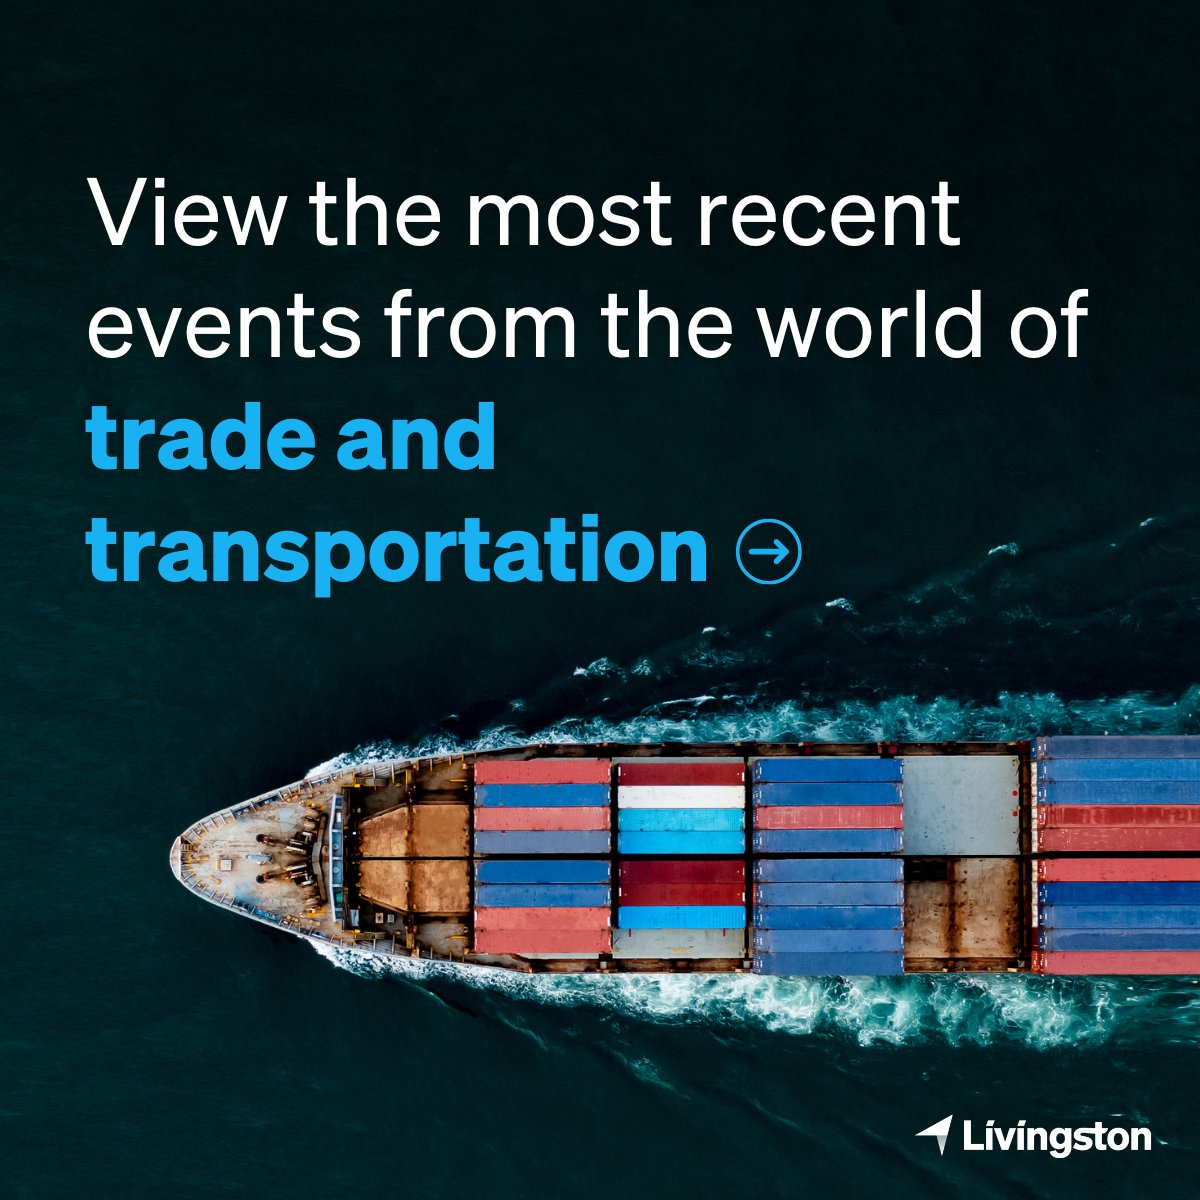 Carriers are concerned about the usefulness of megaships — vessels with TEU capacity over 24,000 — orders for which were placed when demand had skyrocketed. Know why they remain apprehensive here. bit.ly/3QTY3TZ